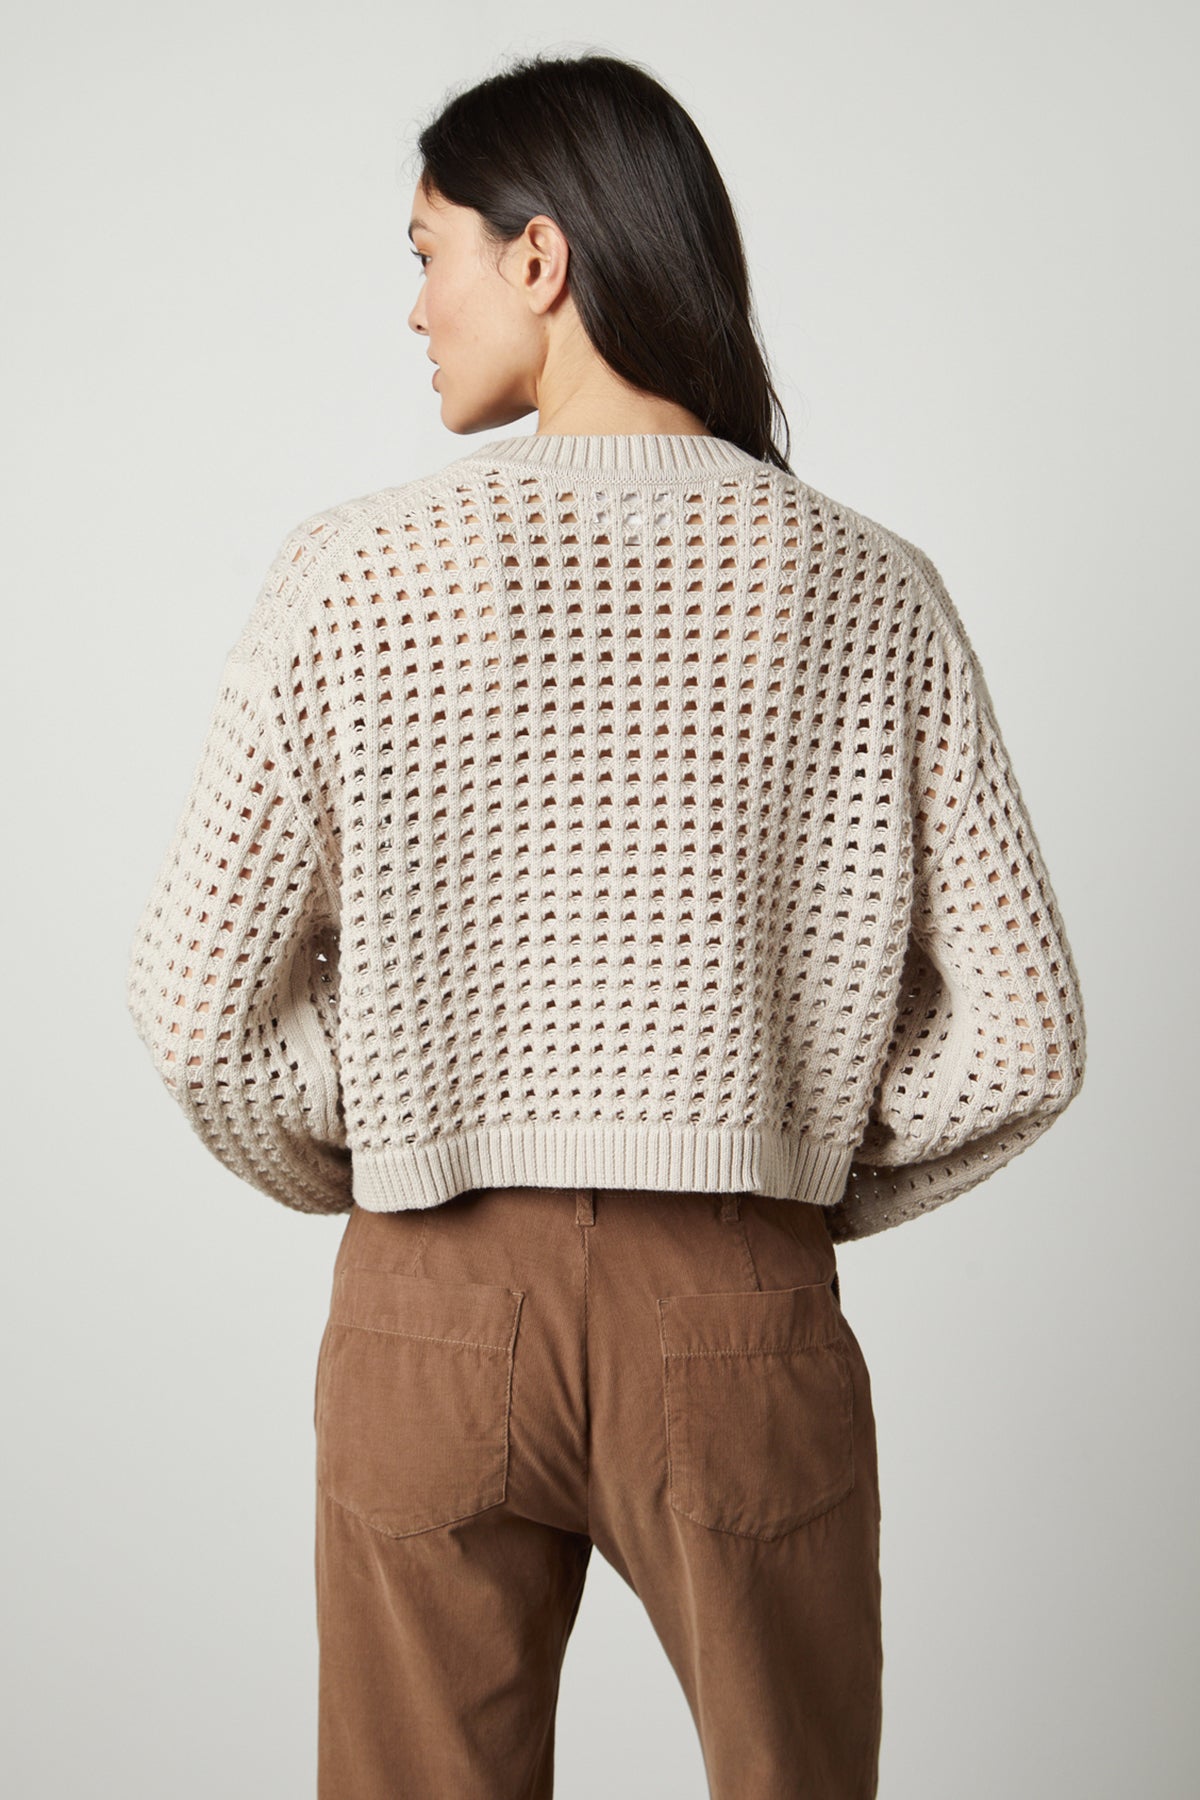   The back view of a woman wearing a Velvet by Graham & Spencer SAMMIE MESH KNIT CREW NECK SWEATER and brown pants. 